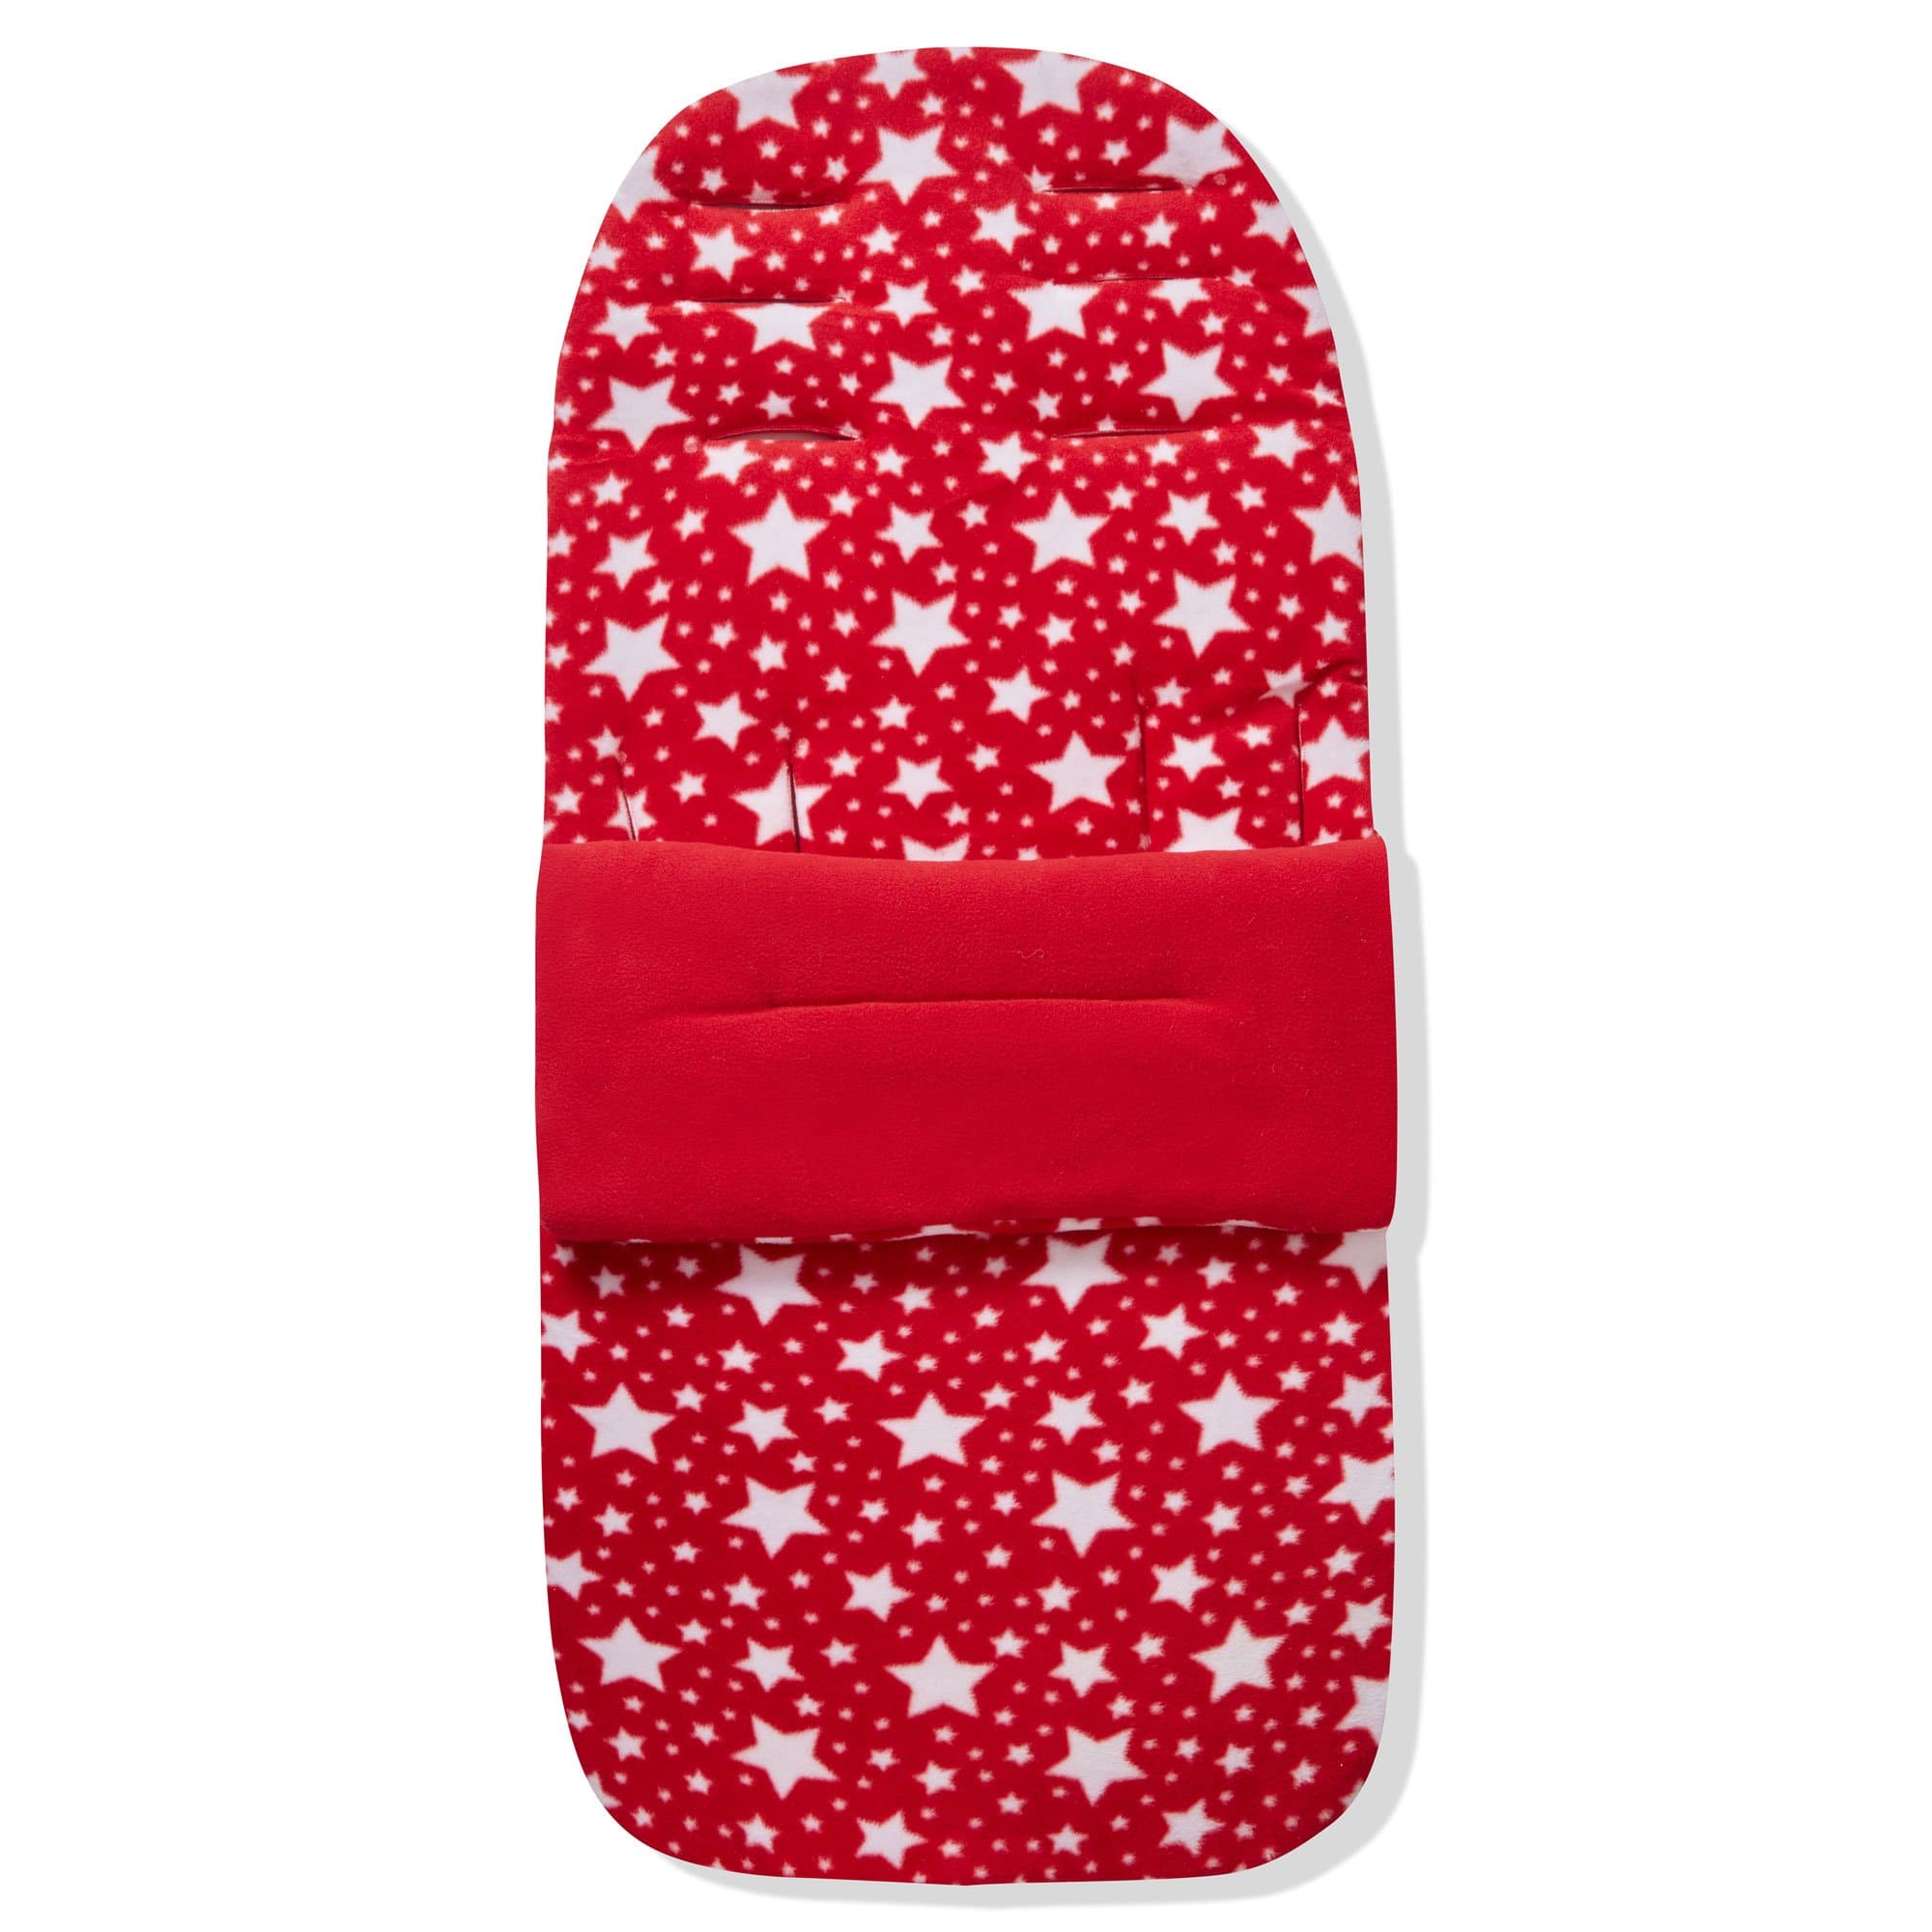 Fleece Footmuff / Cosy Toes Compatible with Venicci - Red Star / Fits All Models | For Your Little One